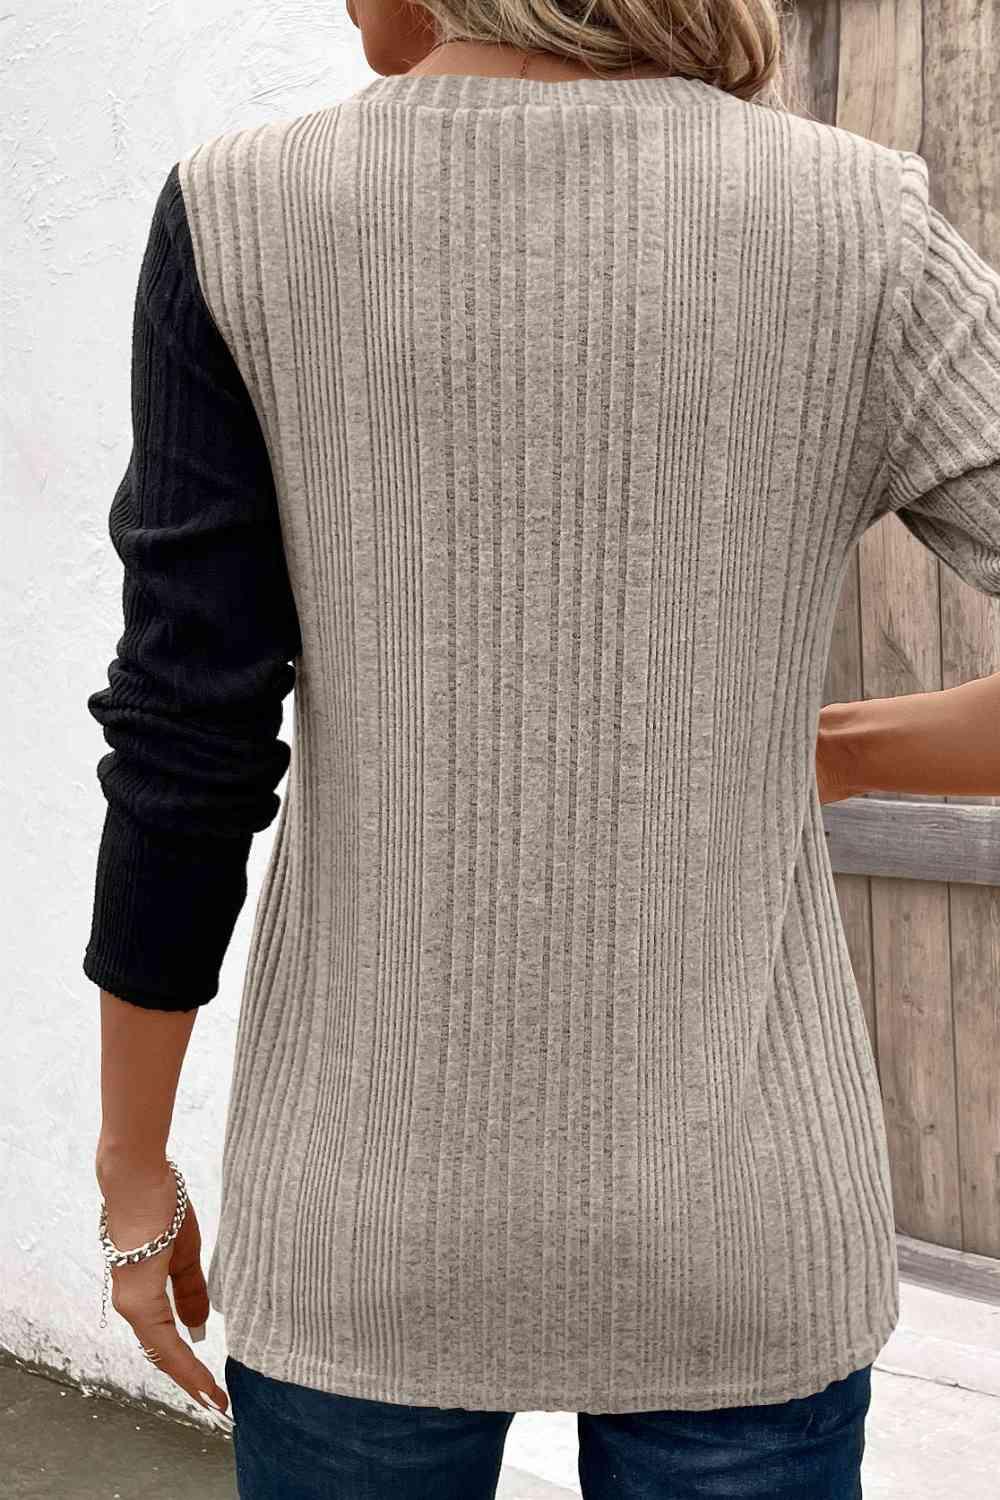 a woman wearing a sweater and jeans